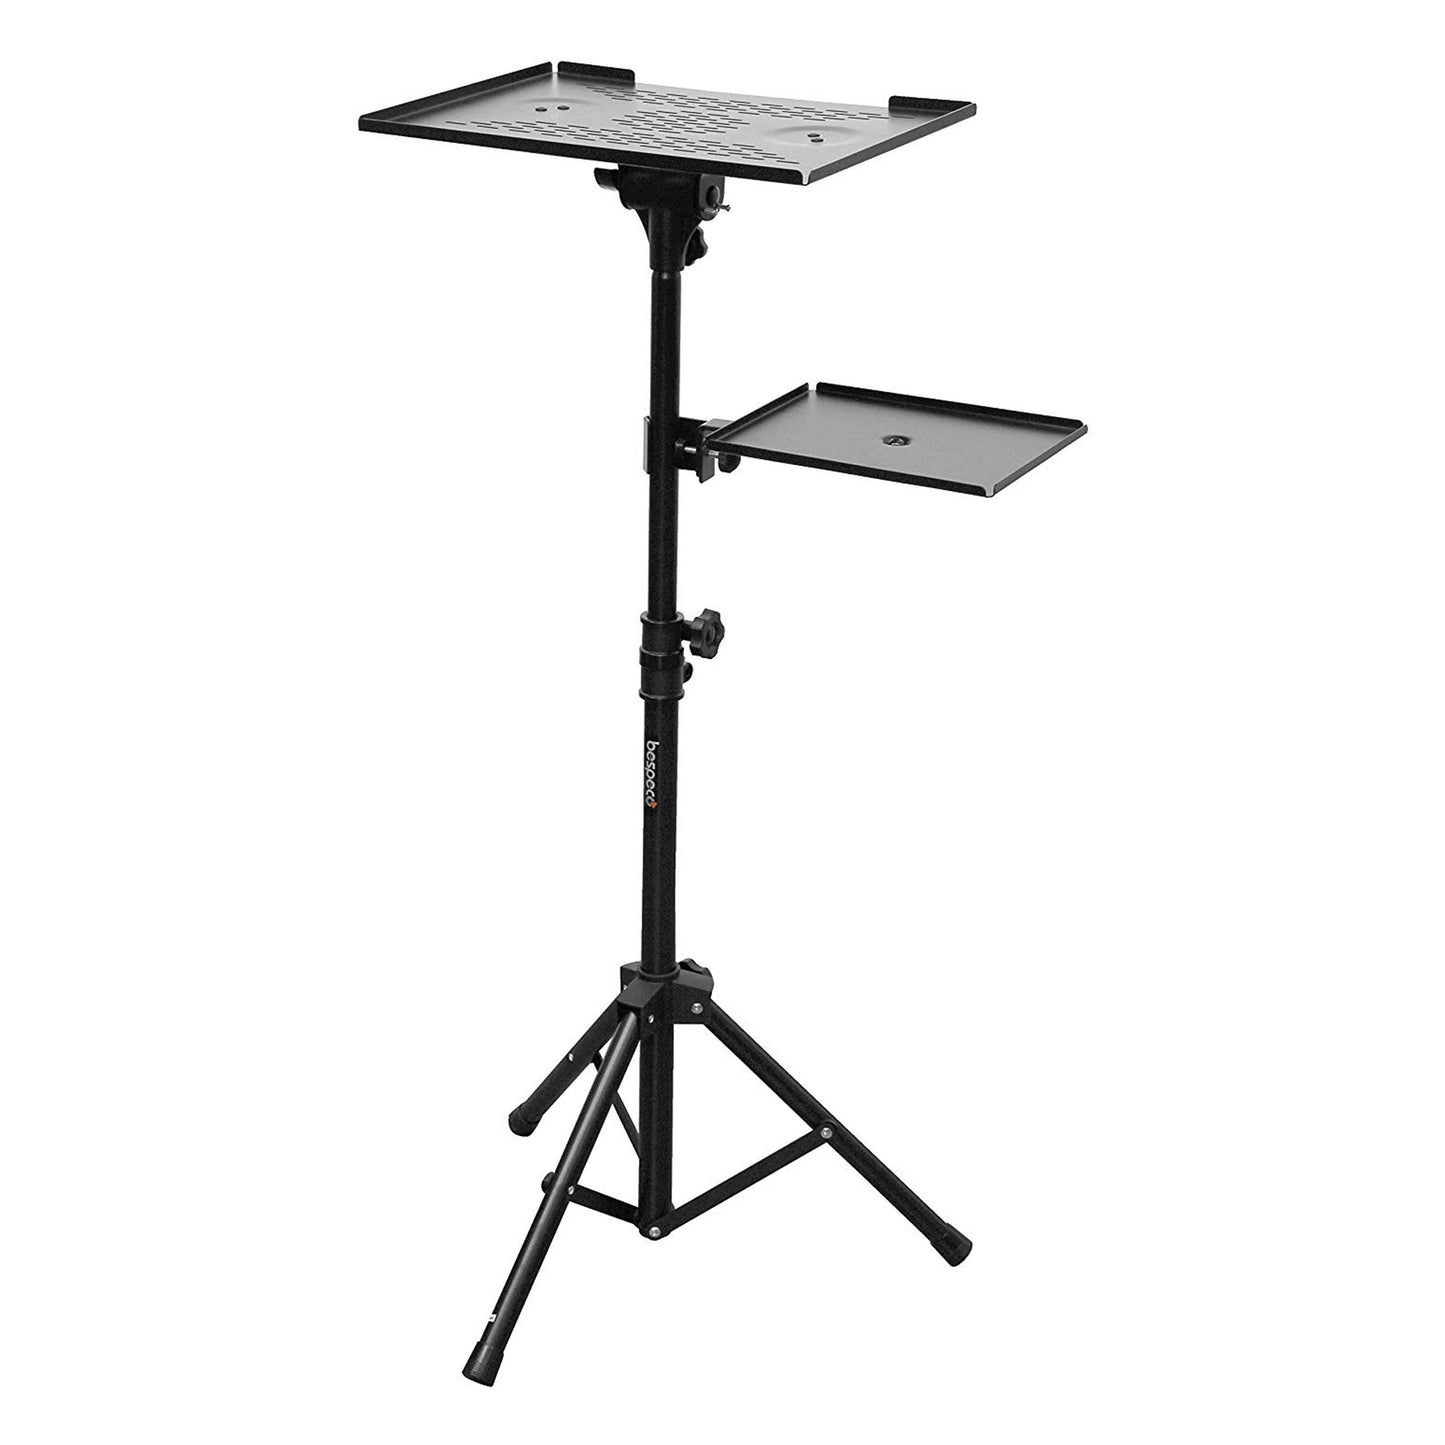 Bespeco LPS100 Adjustable Laptop or Projector Stand with Side Shelf